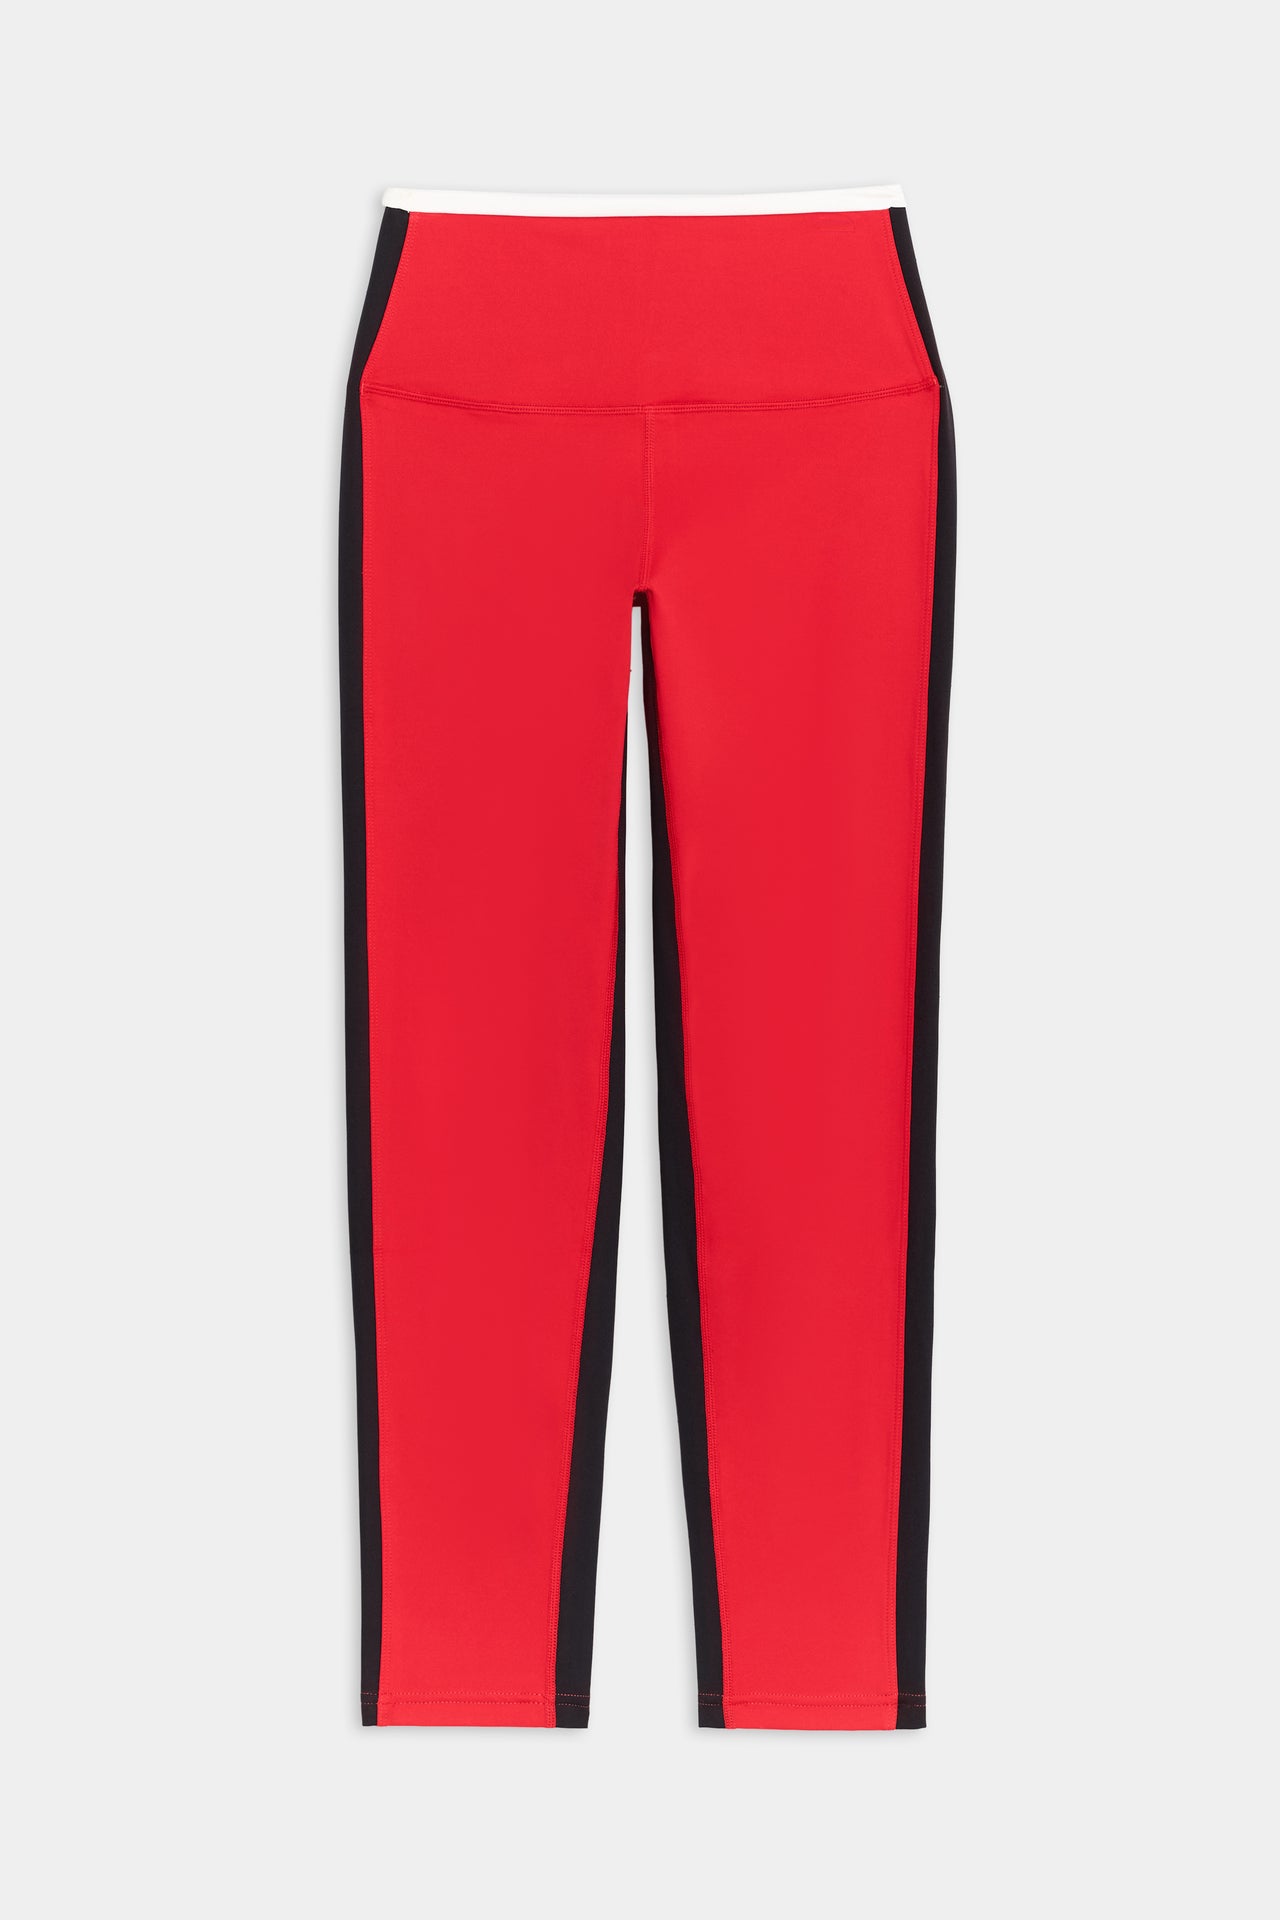 Front flat view of bright red leggings with black side stripes and white waistband